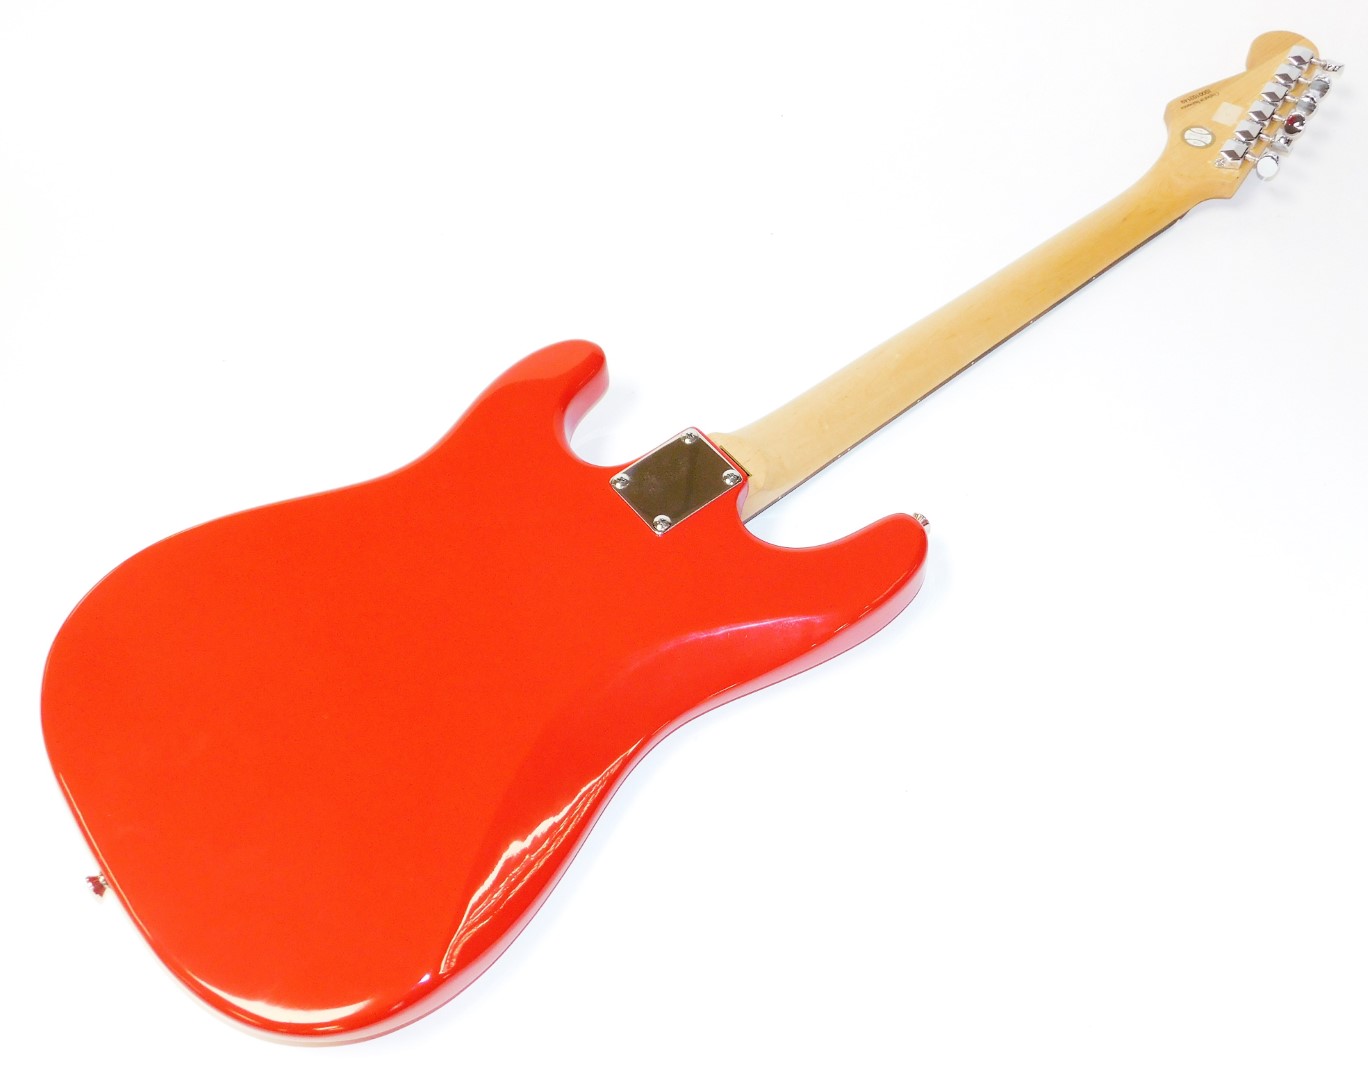 A Squier Fender Bullet six string electric guitar, in red and white colourway, 101cm wide, in associ - Image 4 of 6